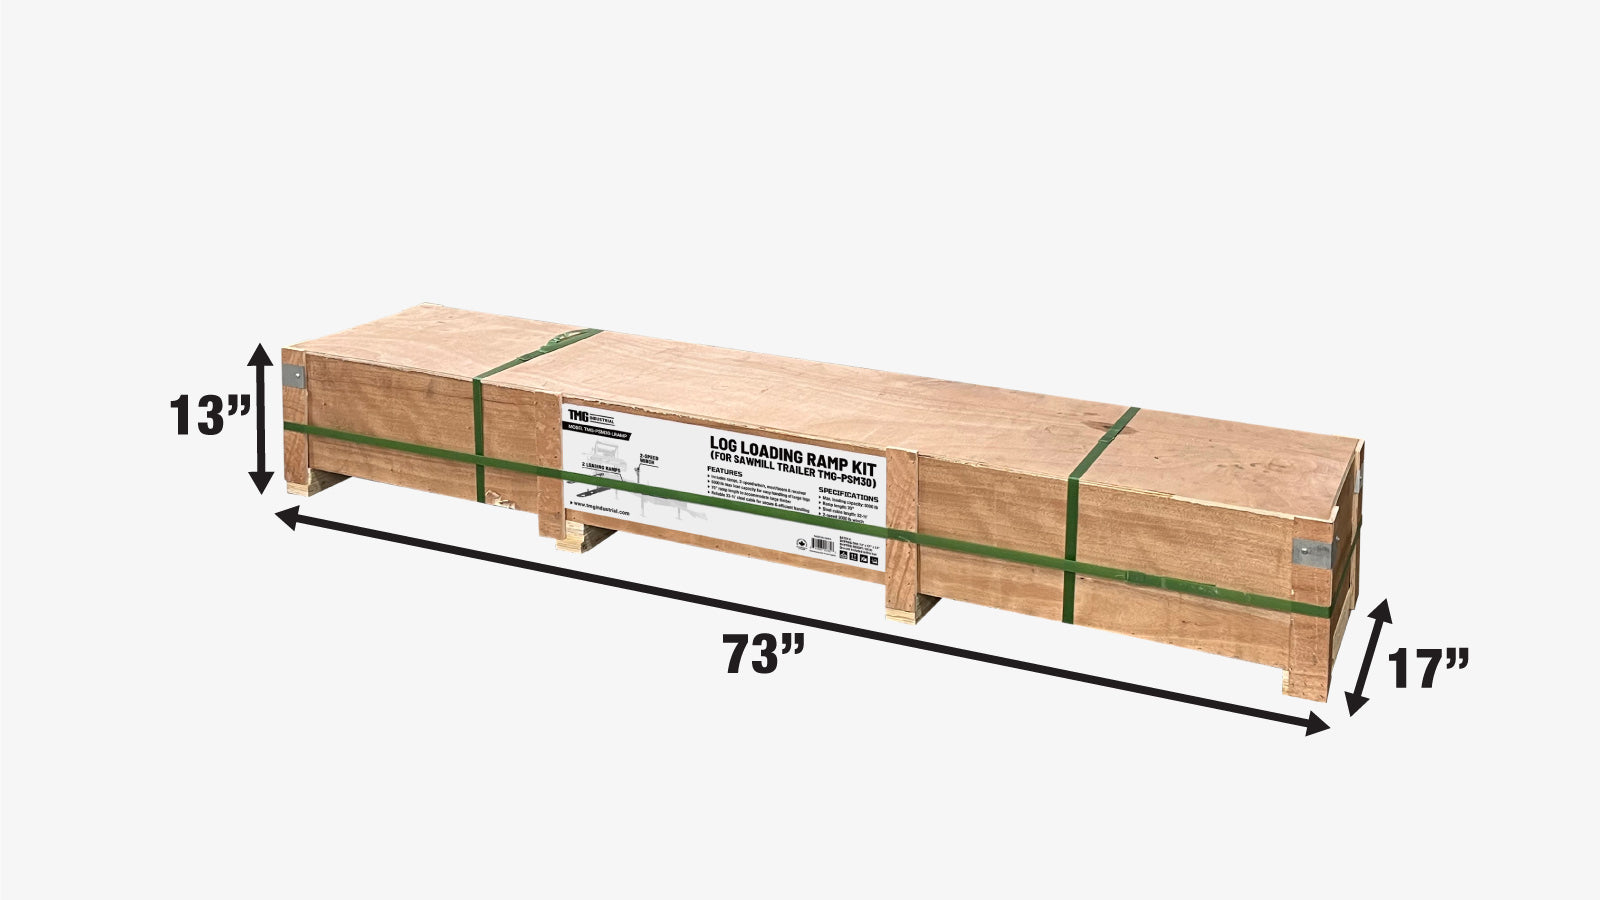 TMG Industrial Log Loading/Rolling & Ramp Package for TMG-PSM30, 2-Speed 2000 Lb Winch, Mast/Boom, Receiver, 70” Ramp Length, 3800 Lb Loading Capacity, 32-½’ Steel Cable, TMG-PSM30-Lramp-shipping-info-image